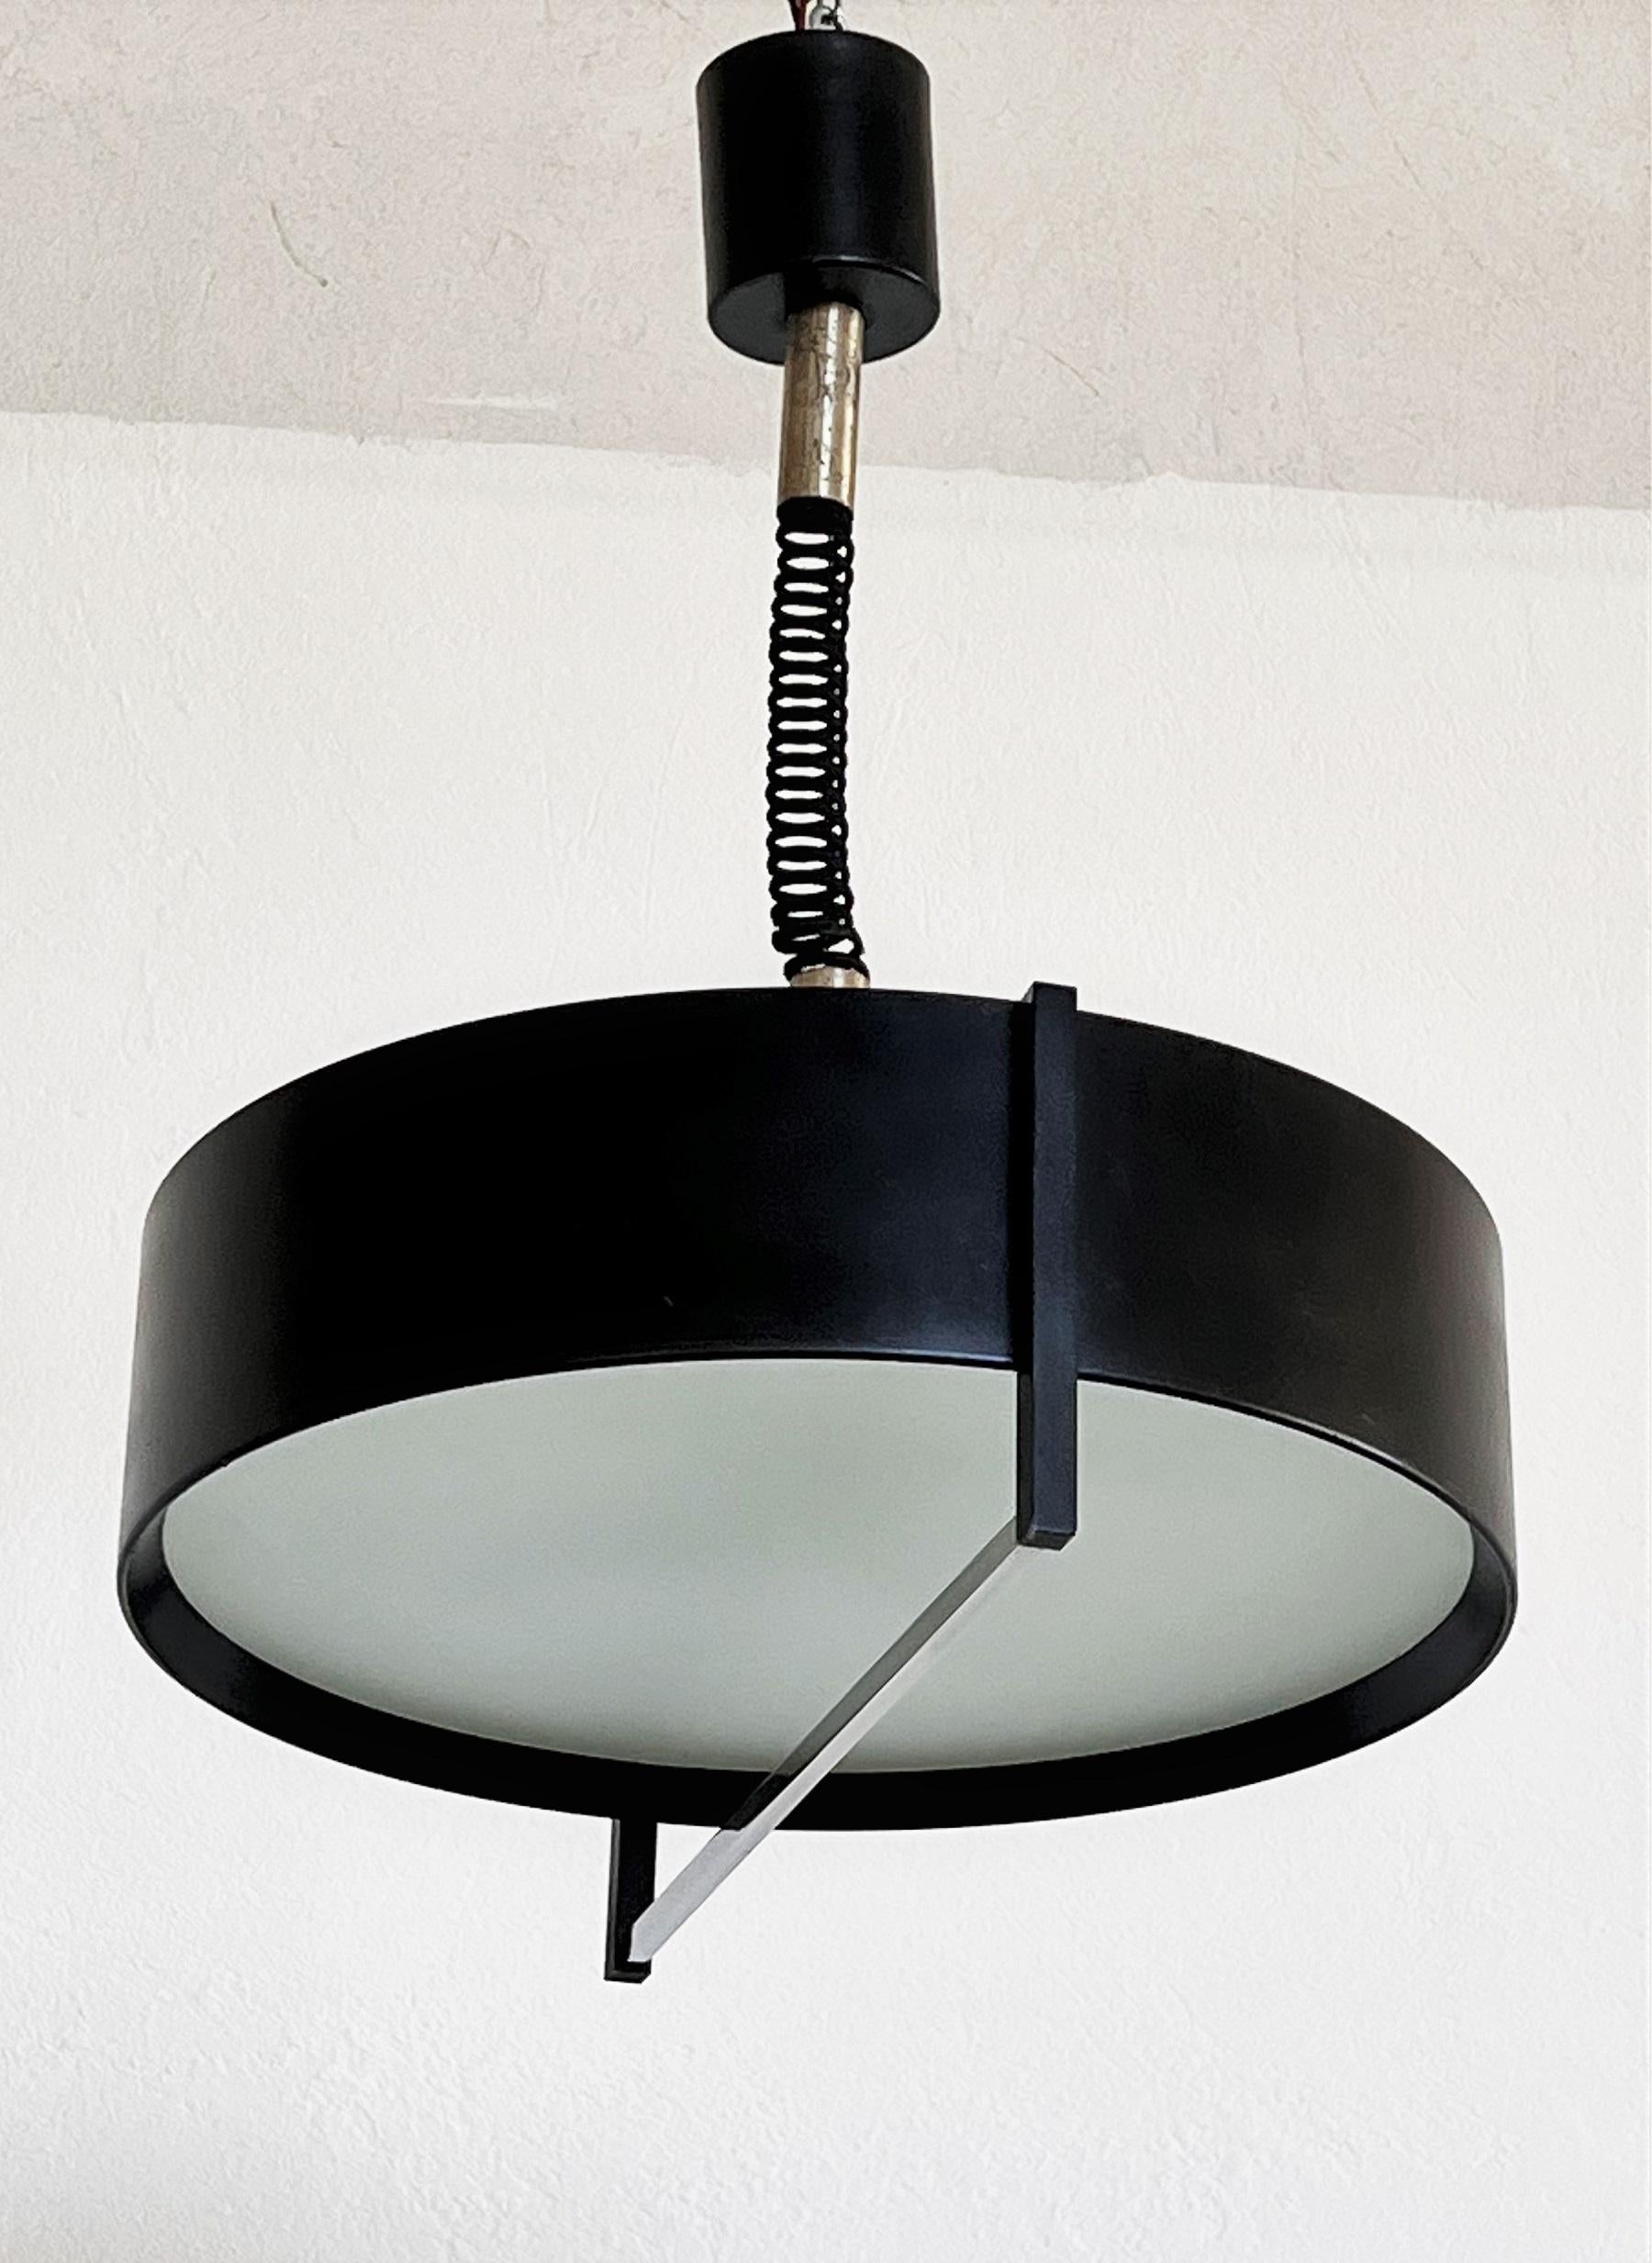 Mid-20th Century Italian Stilnovo Pendant Lamp in Metal and Glass, 1960s For Sale